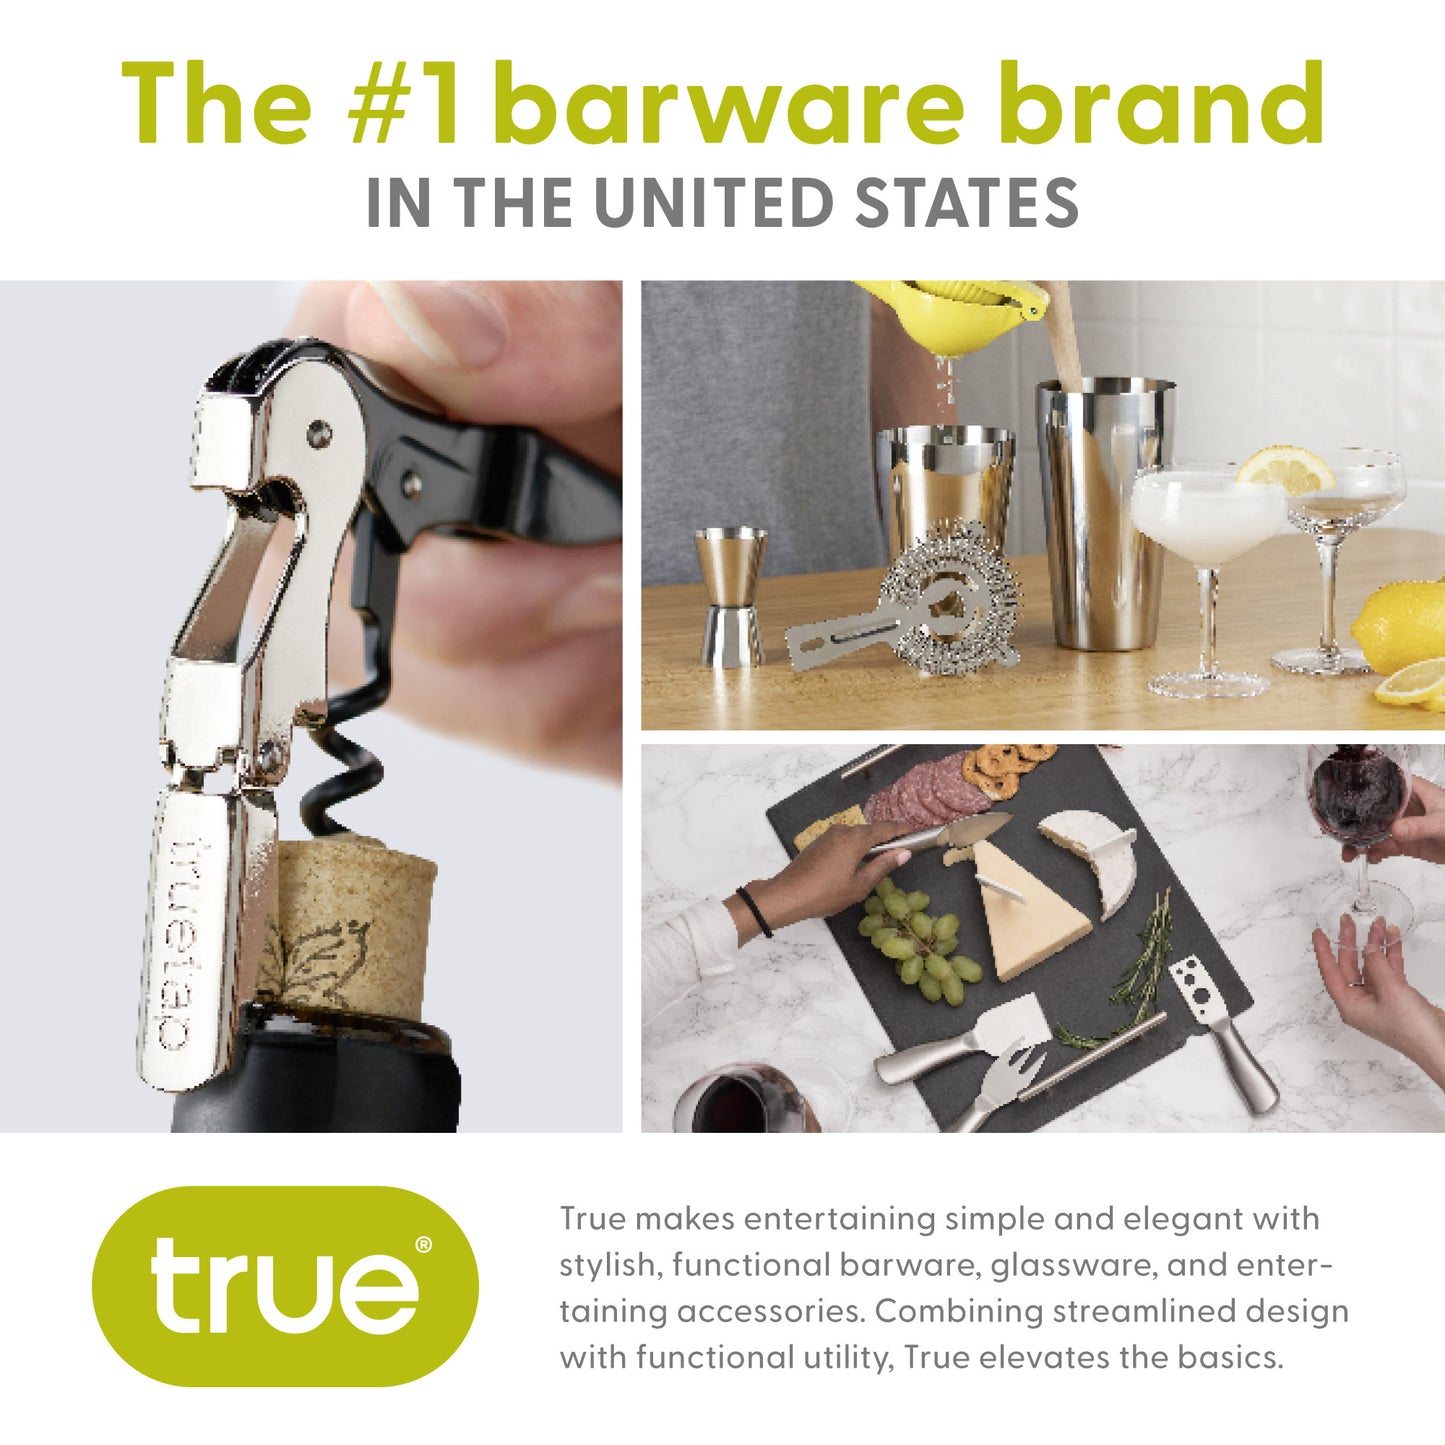 Press Lime Juicer by True